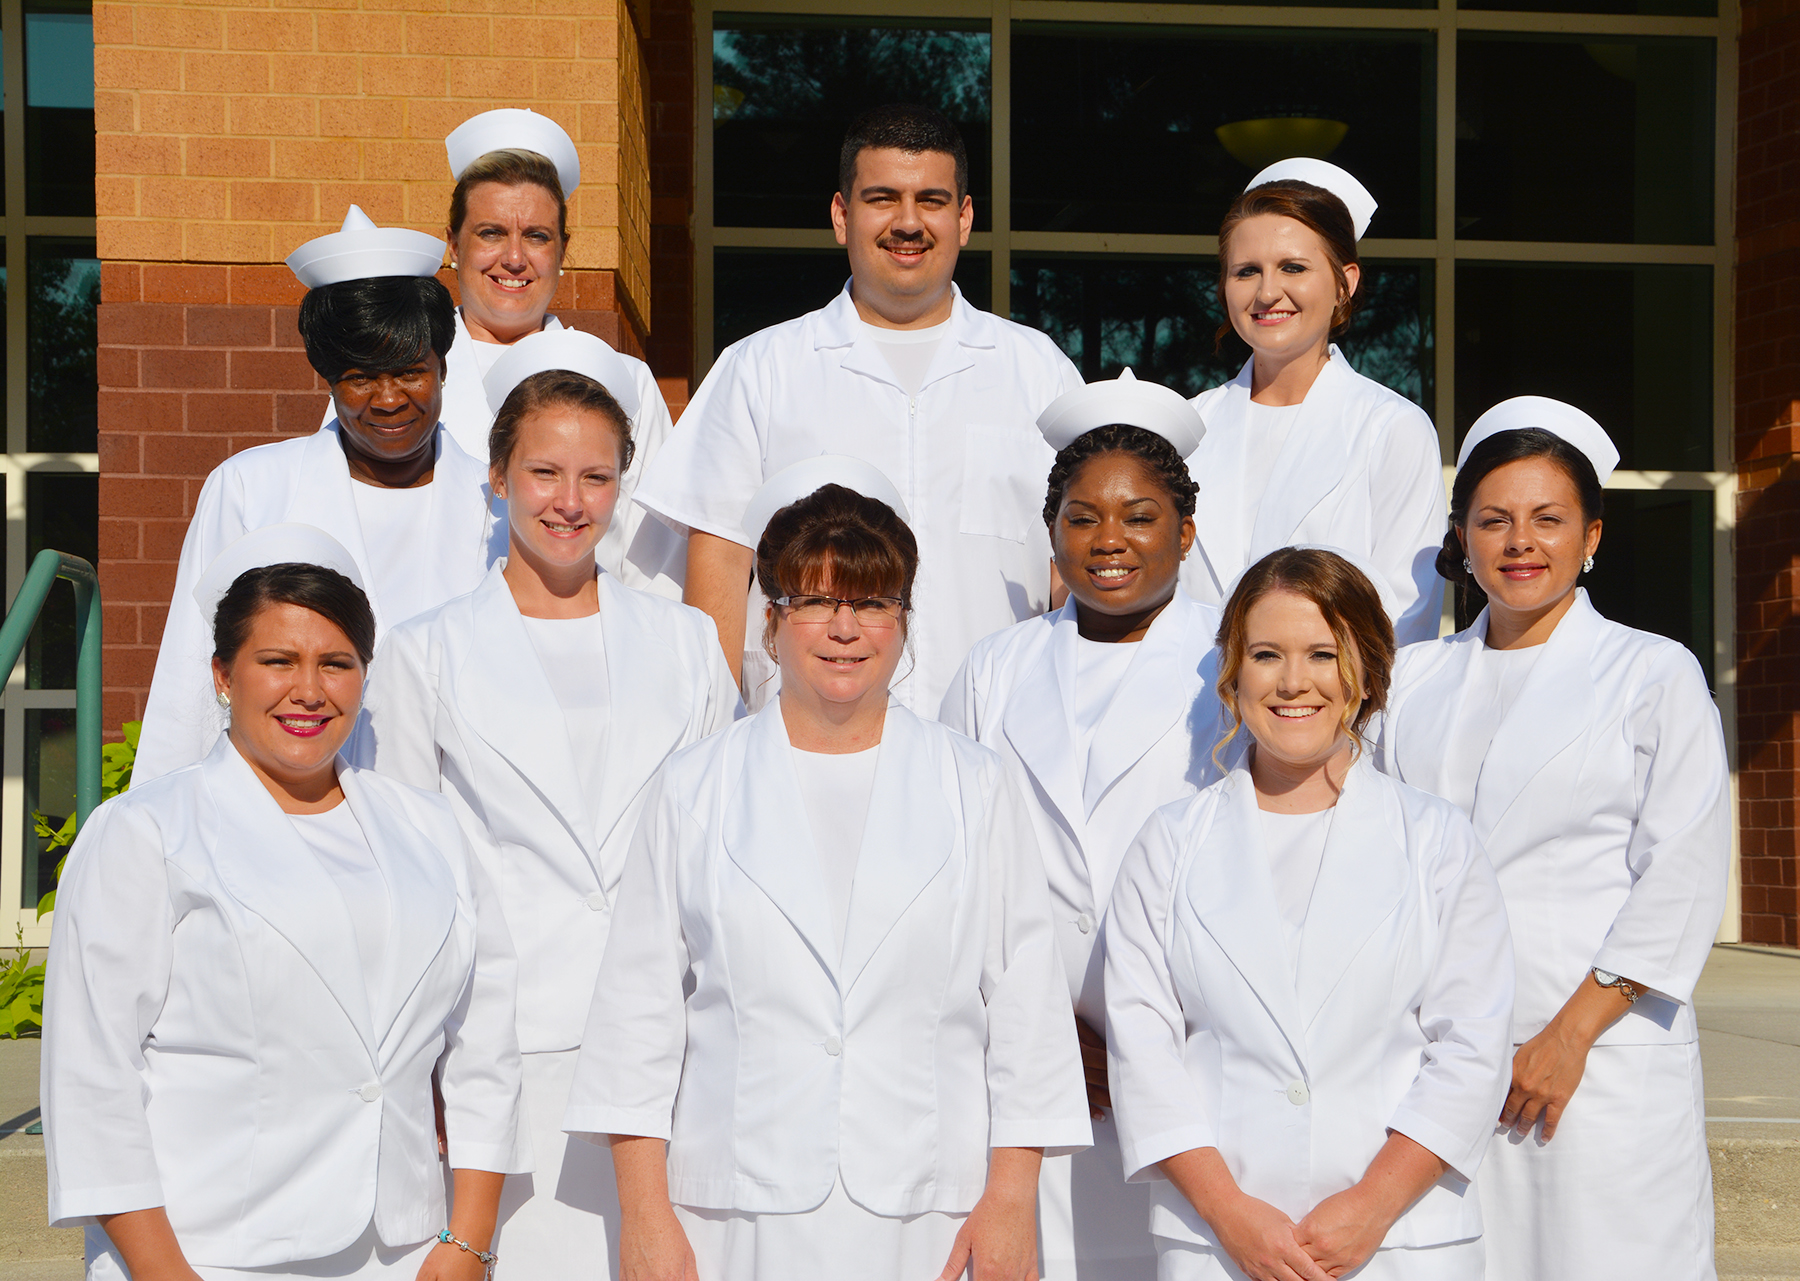 Pictured are members of Richmond Community College’s Practical Nursing Class of 2016, front row, from left to right Sarah Cross, Katina Davis and Cierra Worriax; second row, from left to right, Robin Locklear, Tashzna Bostic and Briana Strickland; in back, from left to right, Cory Moore, Miguel Alvarez, Kylie Lewis and Ursula Spinks.